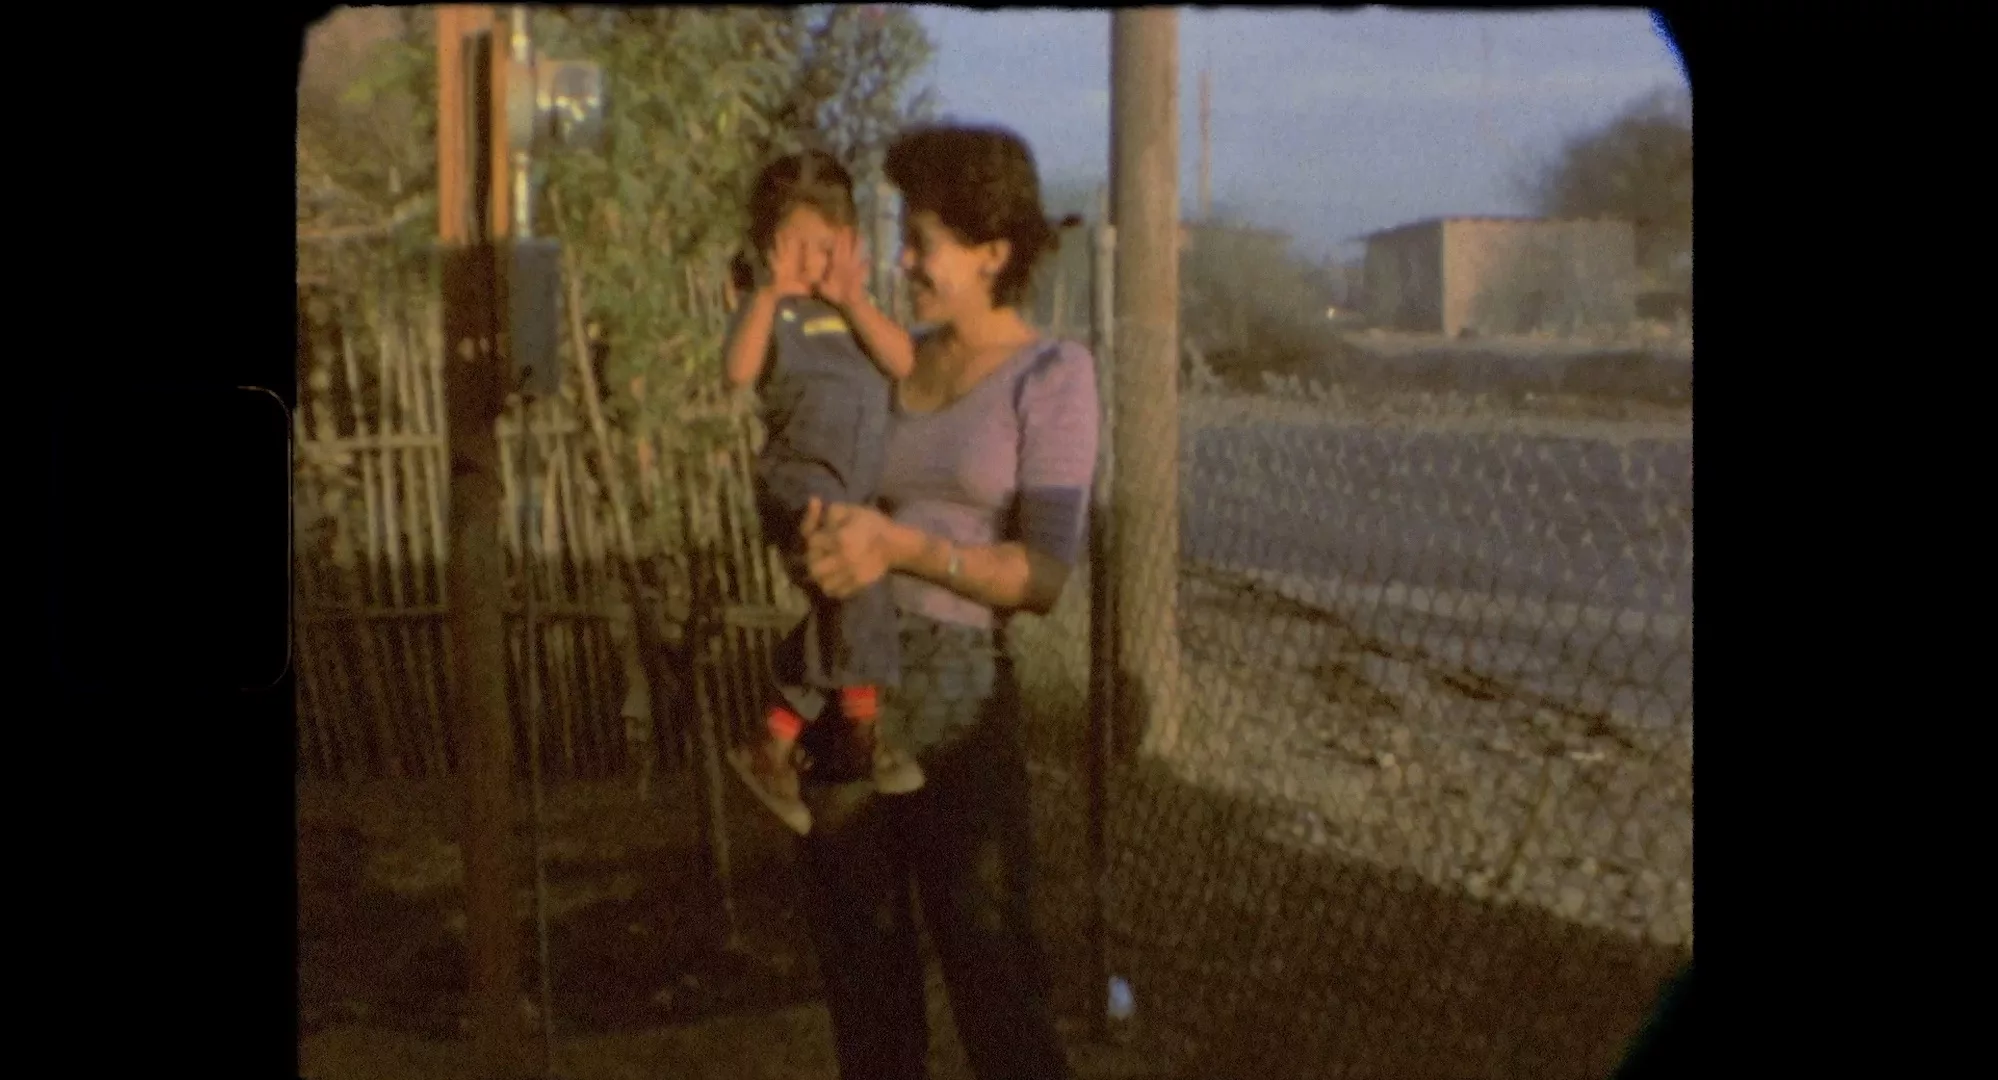 A old film still with a woman holding a child. The child hides her face in her hands. They are standing on a sidewalk and the sky is blue in the background.